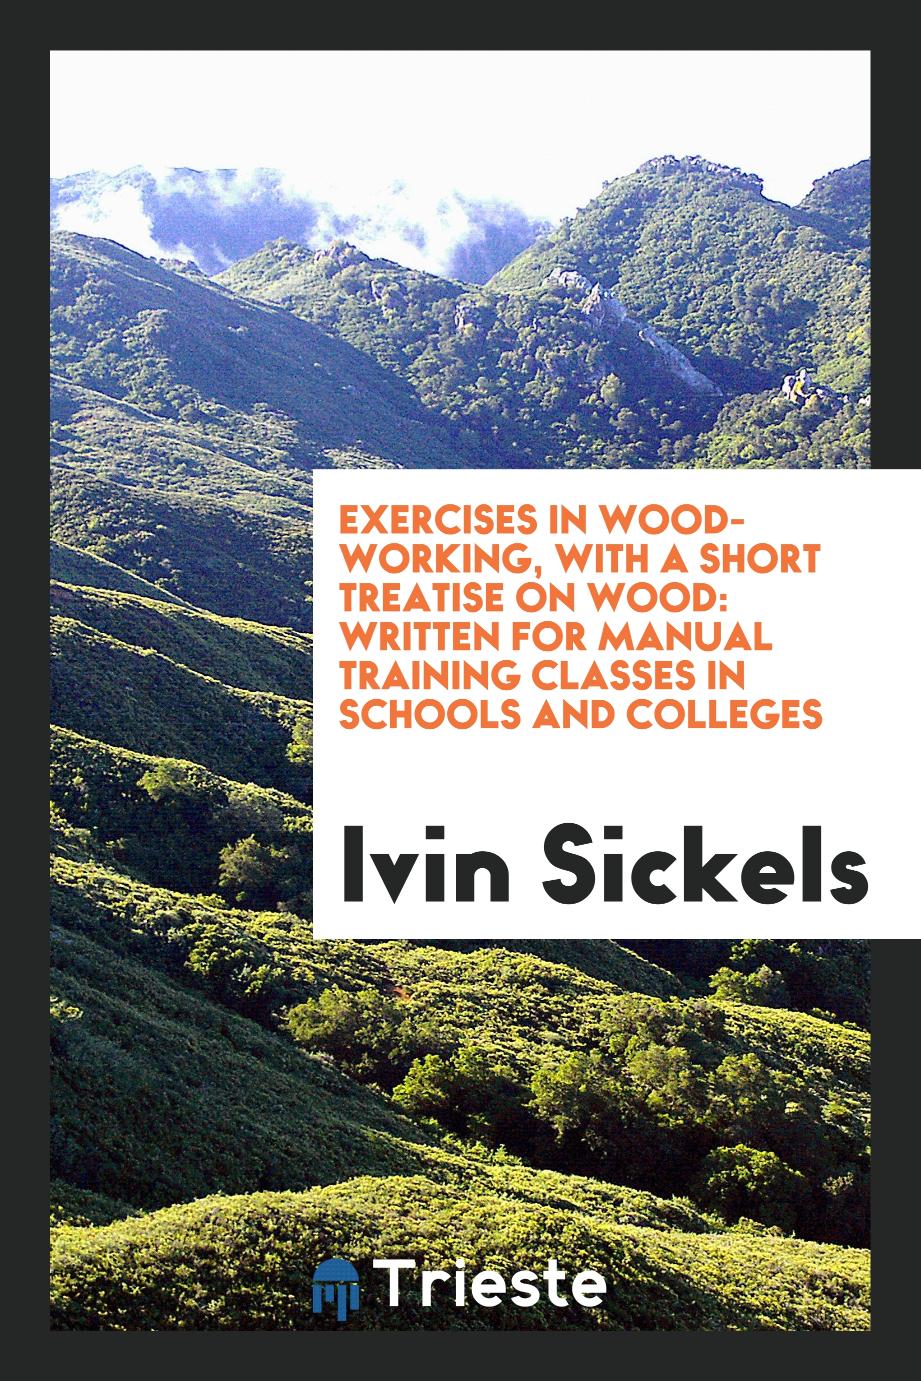 Exercises in Wood-Working, with a Short Treatise on Wood: Written for Manual Training Classes in Schools and Colleges